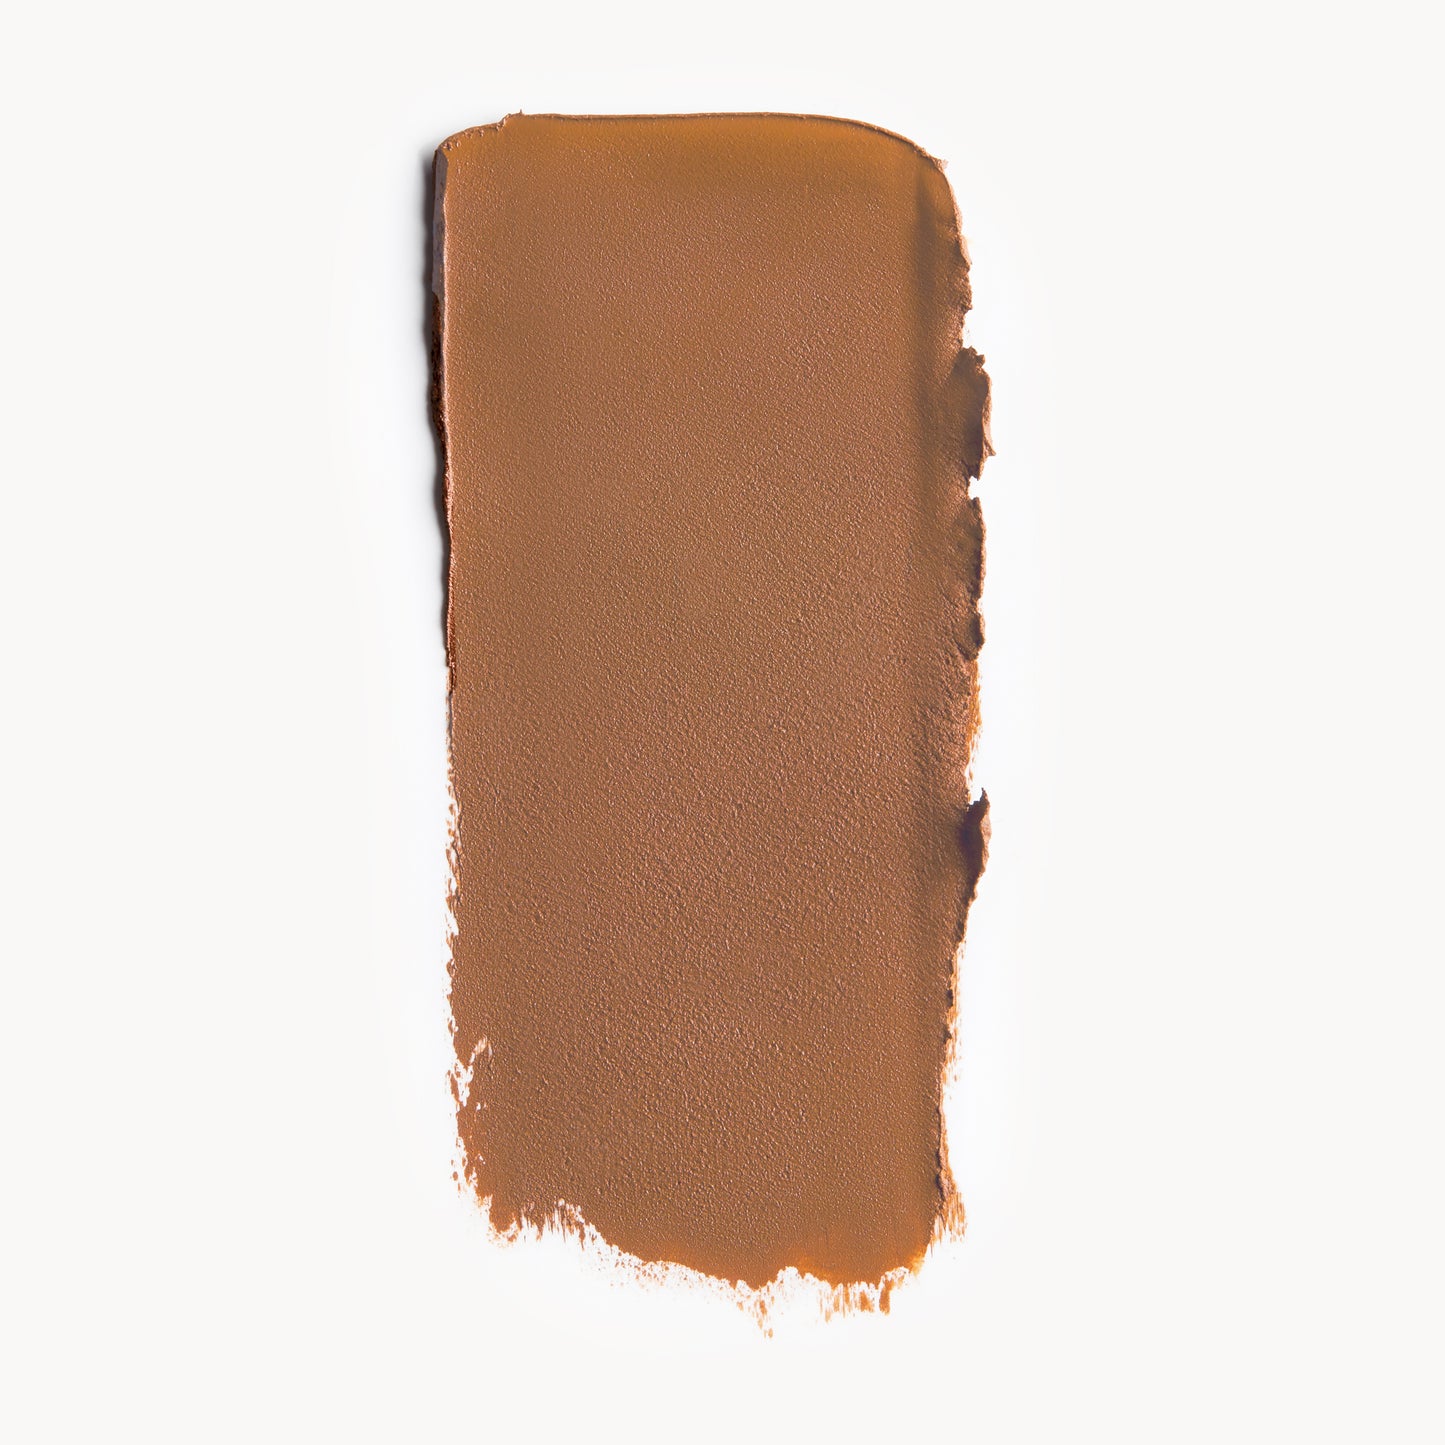 A wipe of tan cool-toned cream foundation on a white background